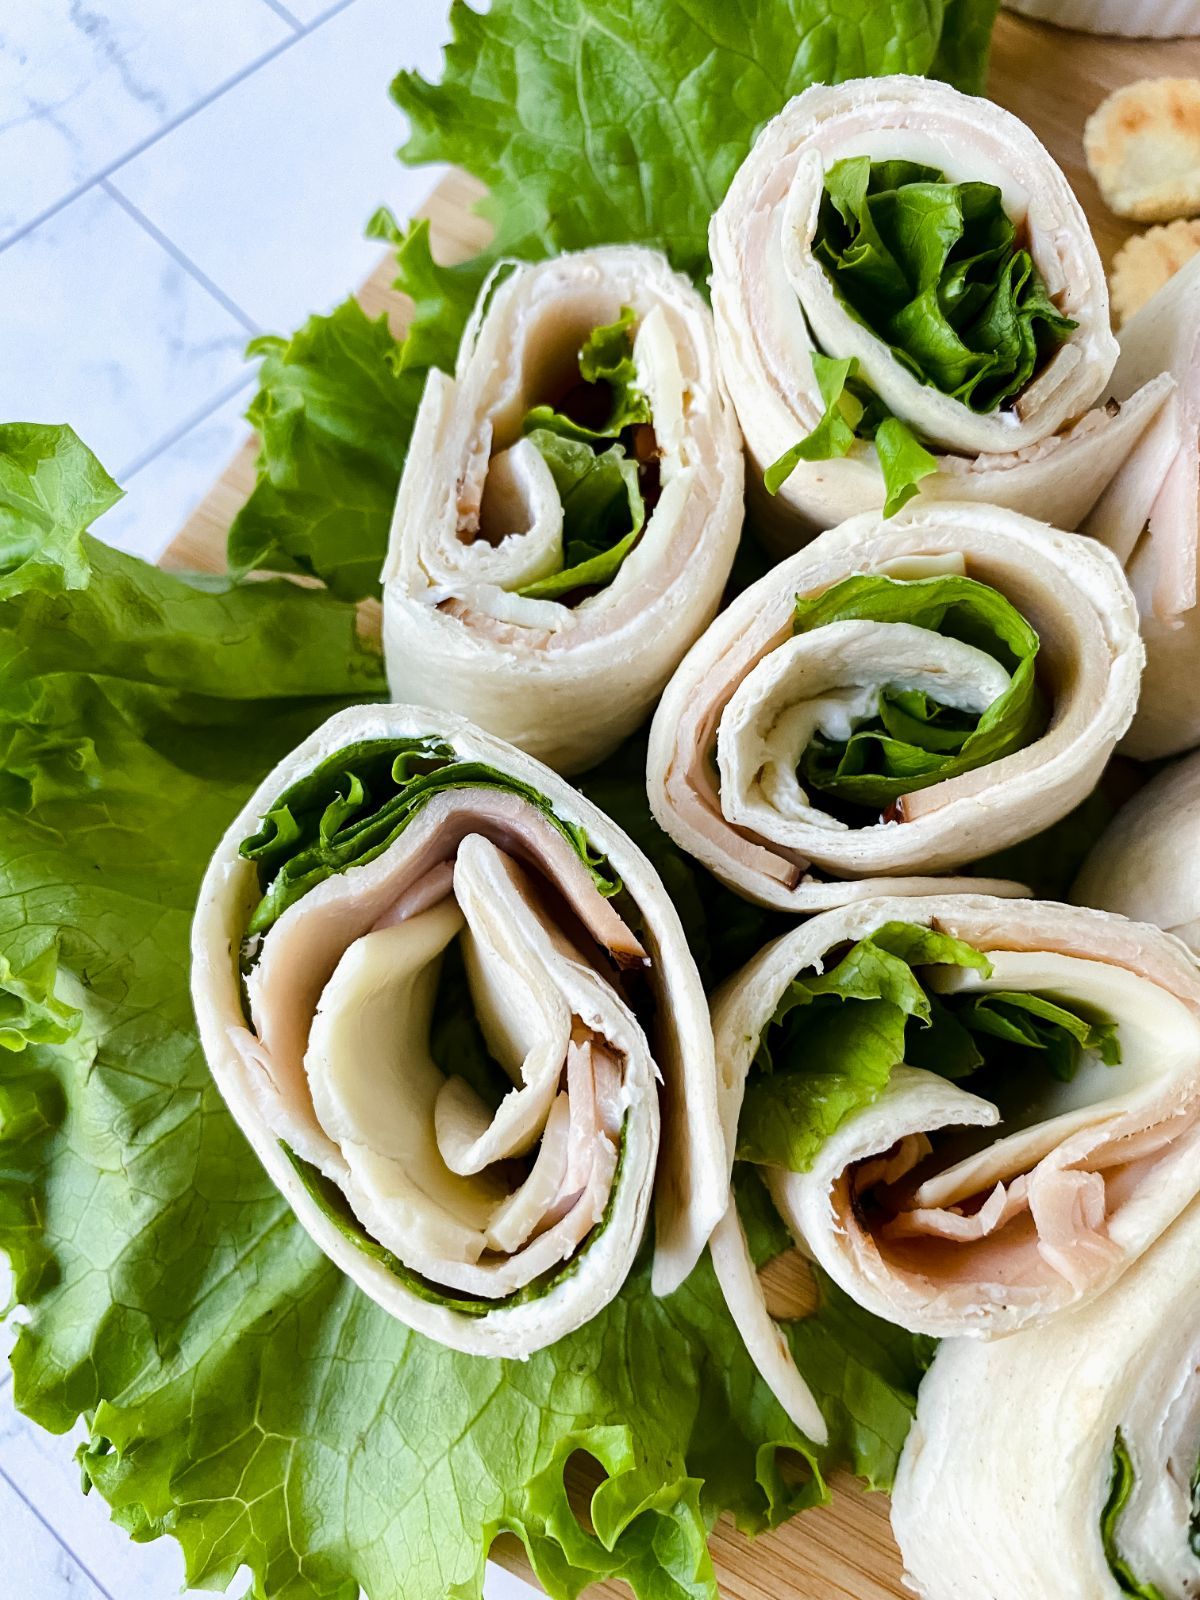 turkey and cheese pinwheels on lettuce